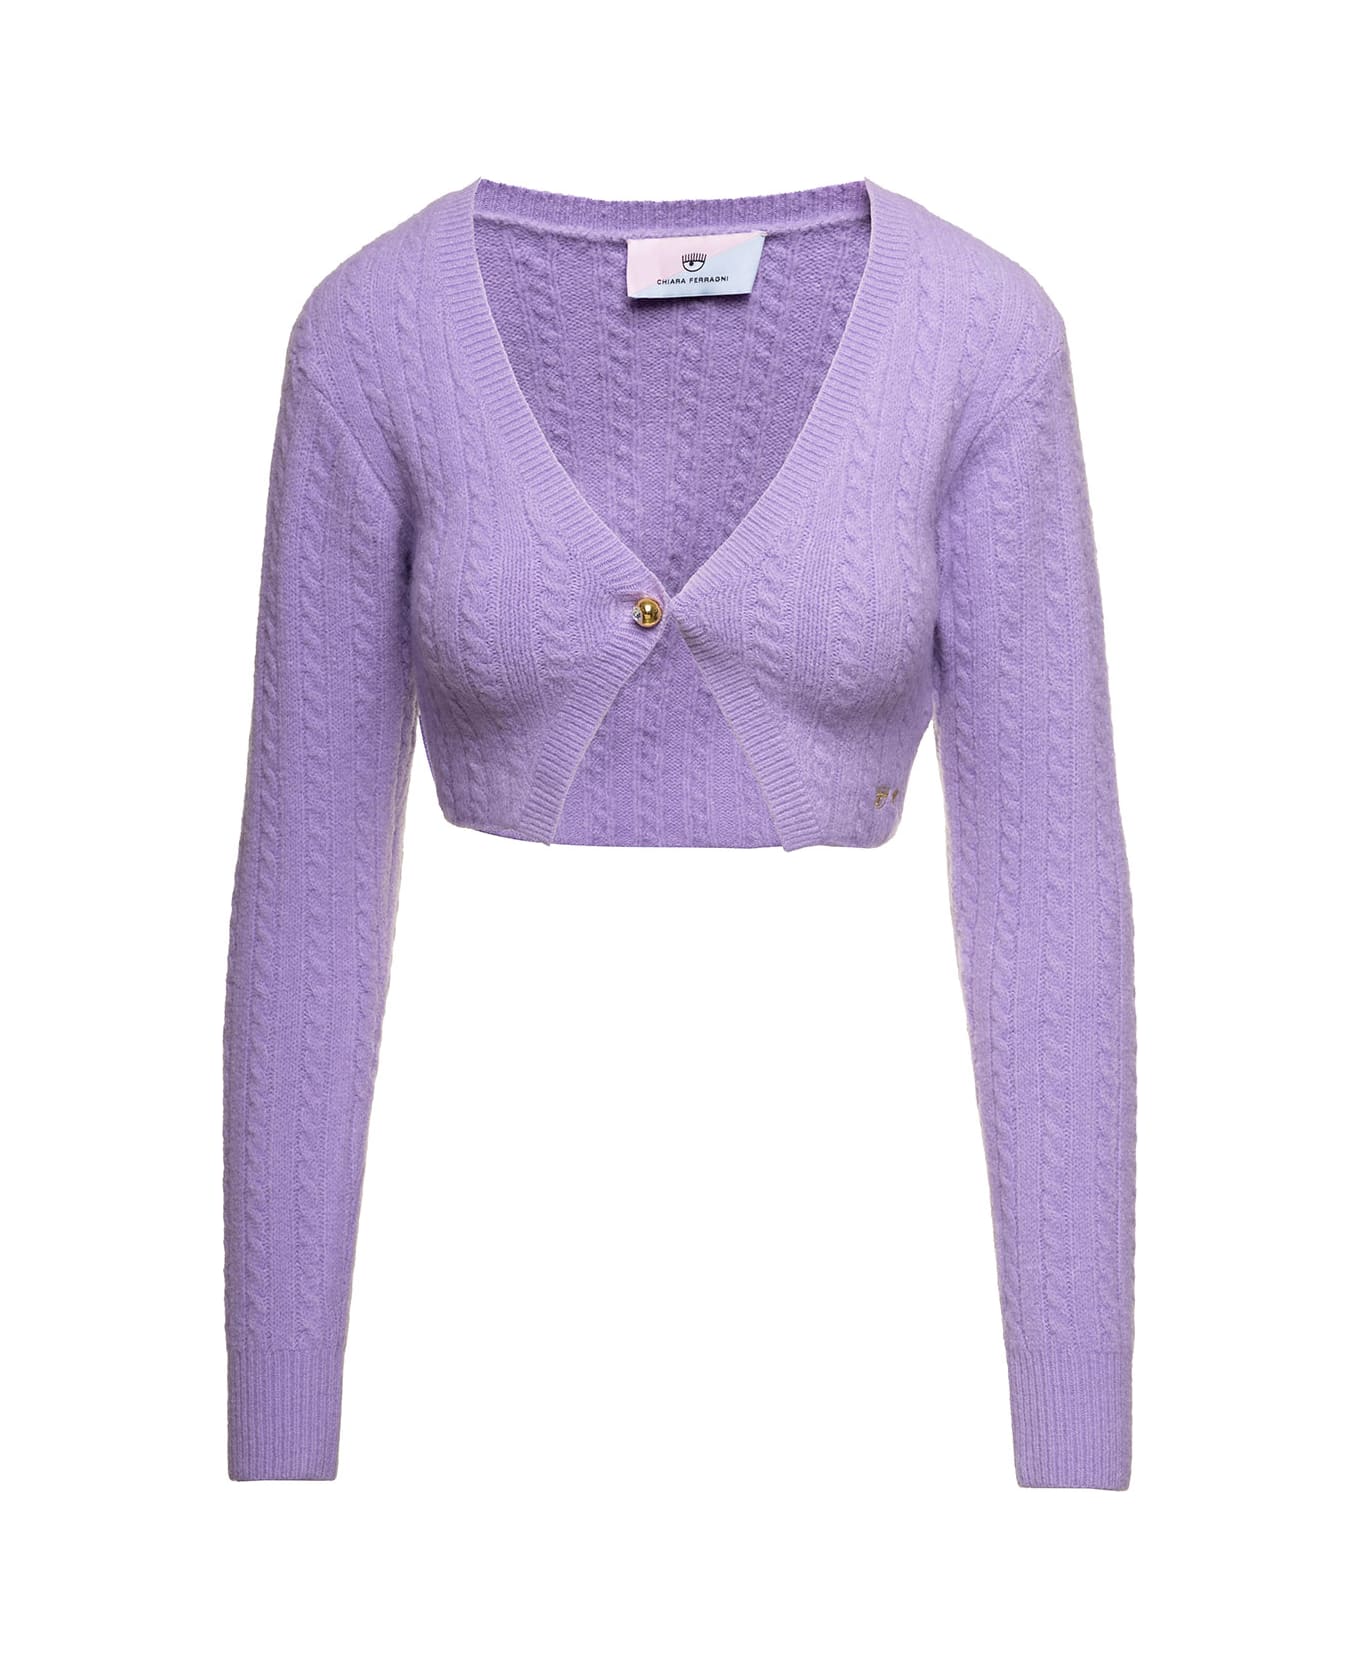 Chiara Ferragni Purple Cable-knit Cropped Cardigan With Embroidered Logo In Stretch Wool Blend Woman - Lilac